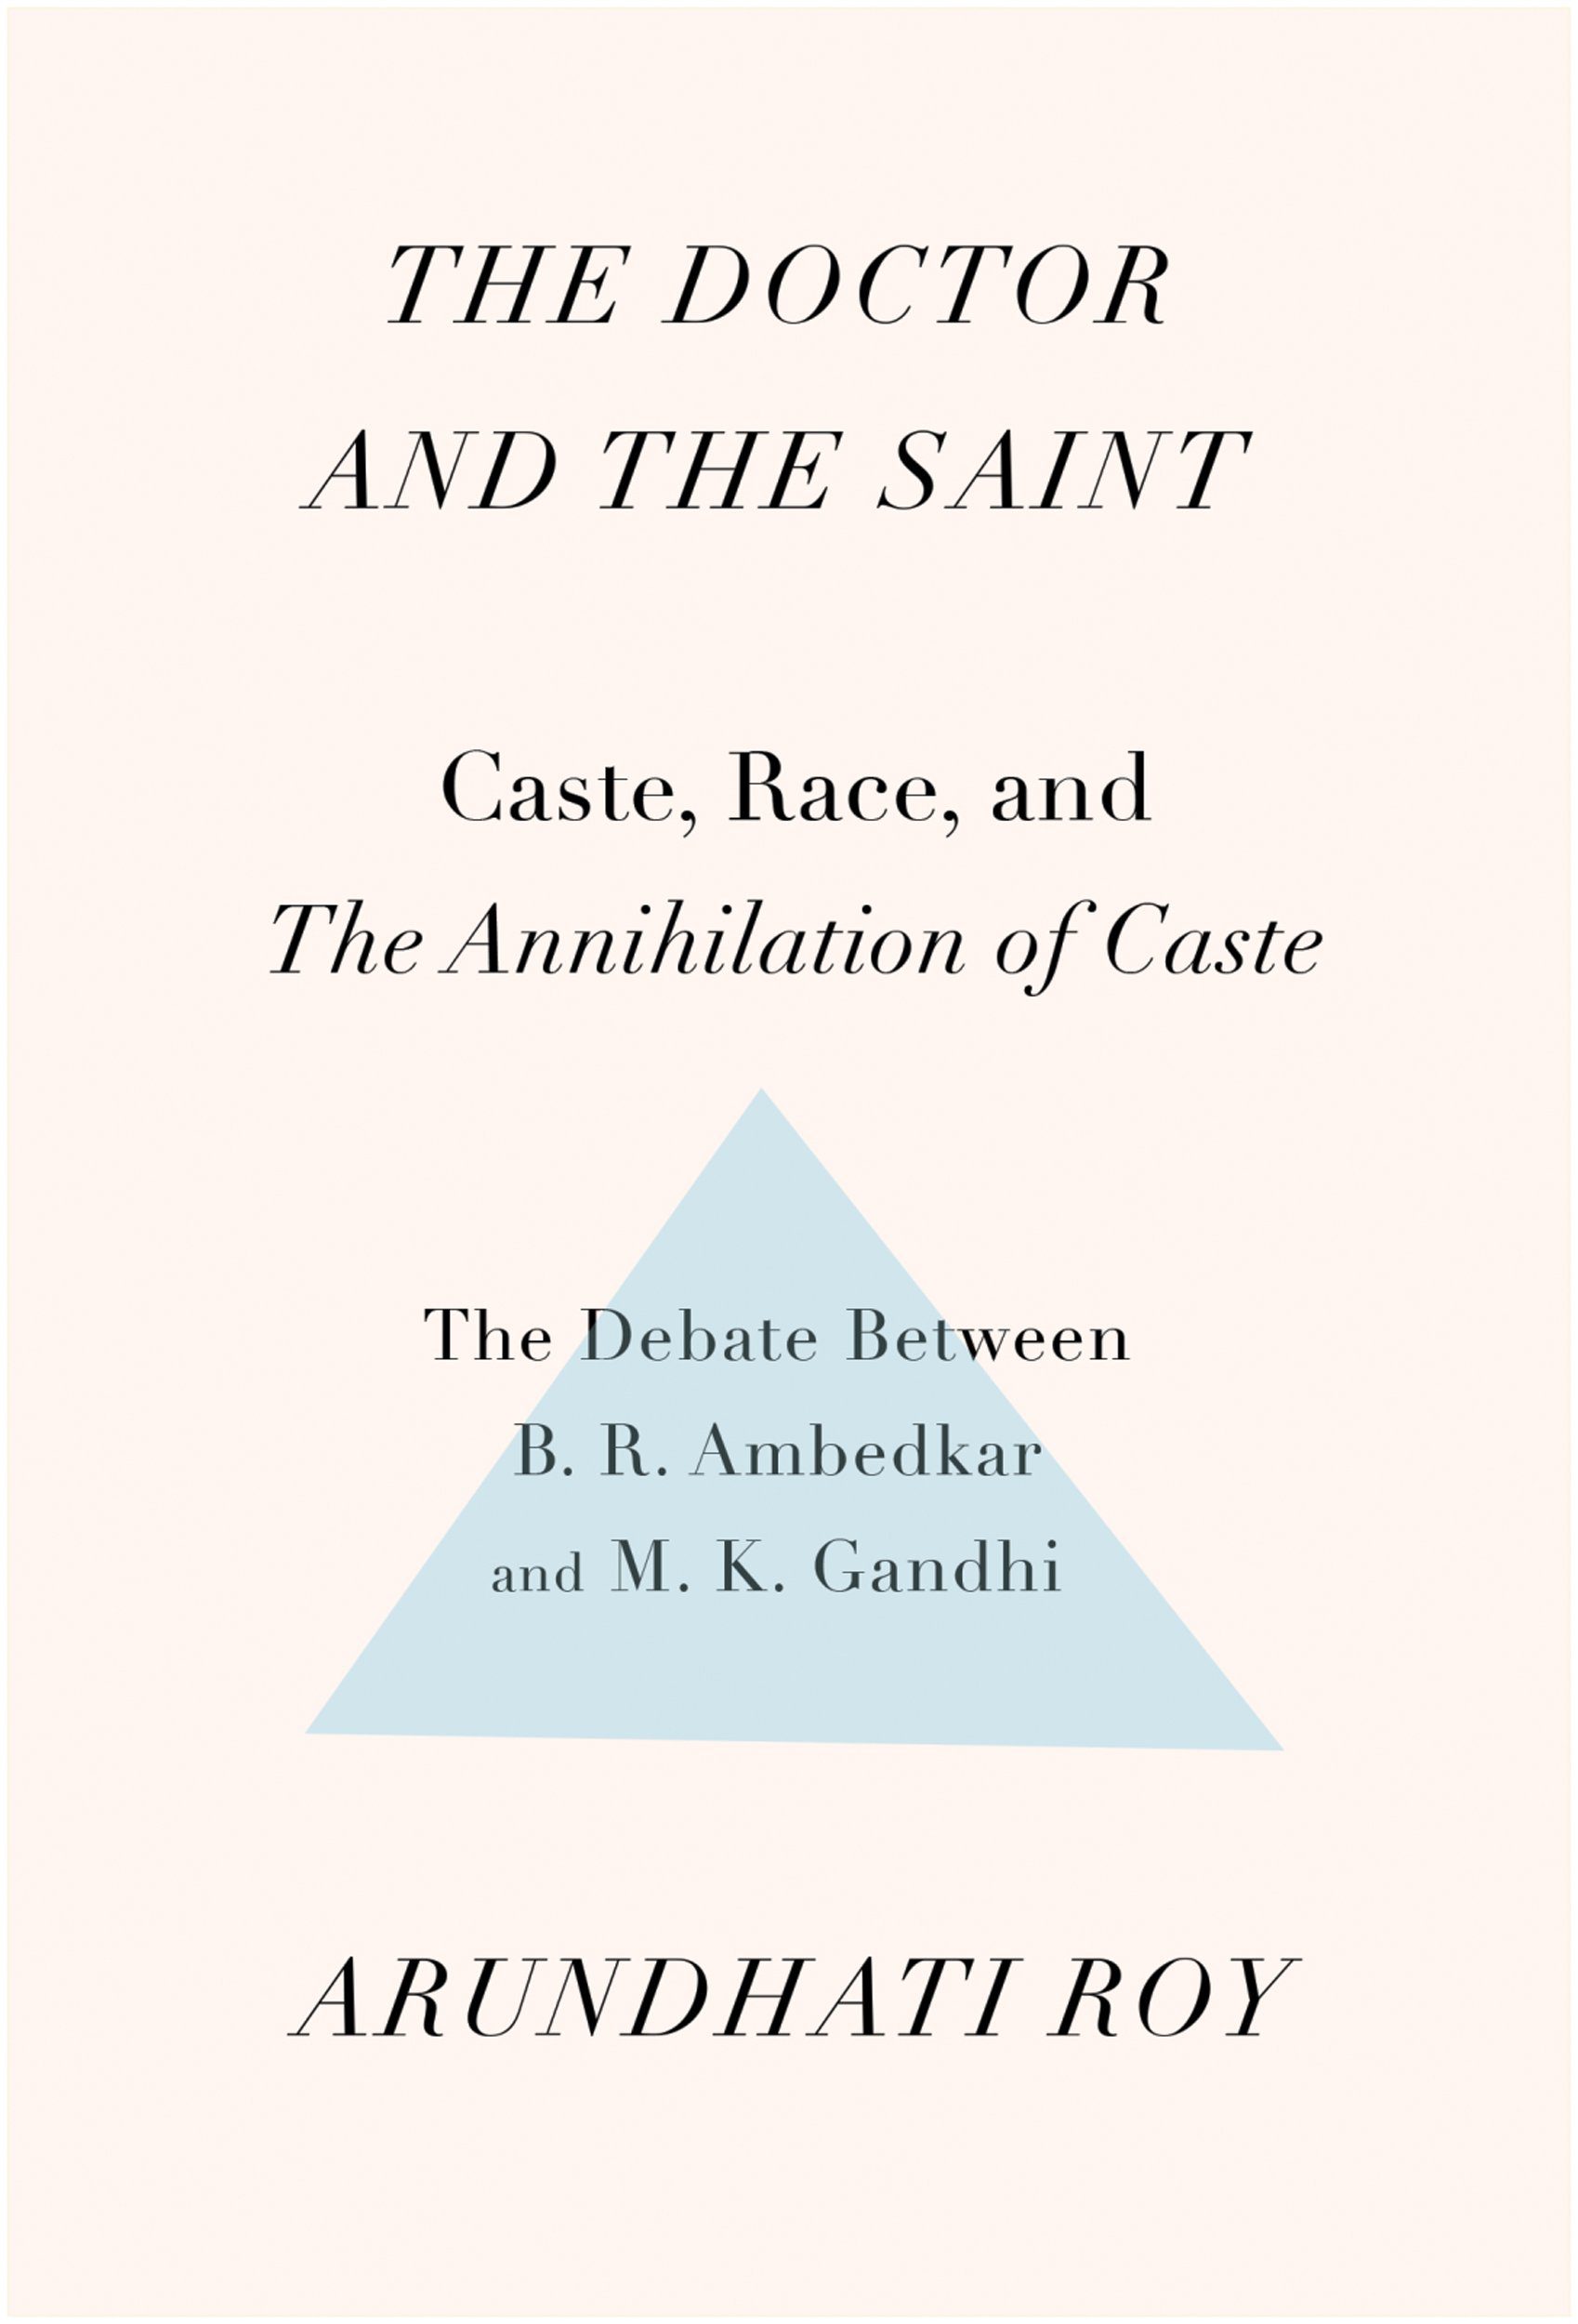 The Doctor and the Saint- Caste, Race, and Annihilation of Caste, the Debate Between B.R. Ambedkar and M.K. Gandhi